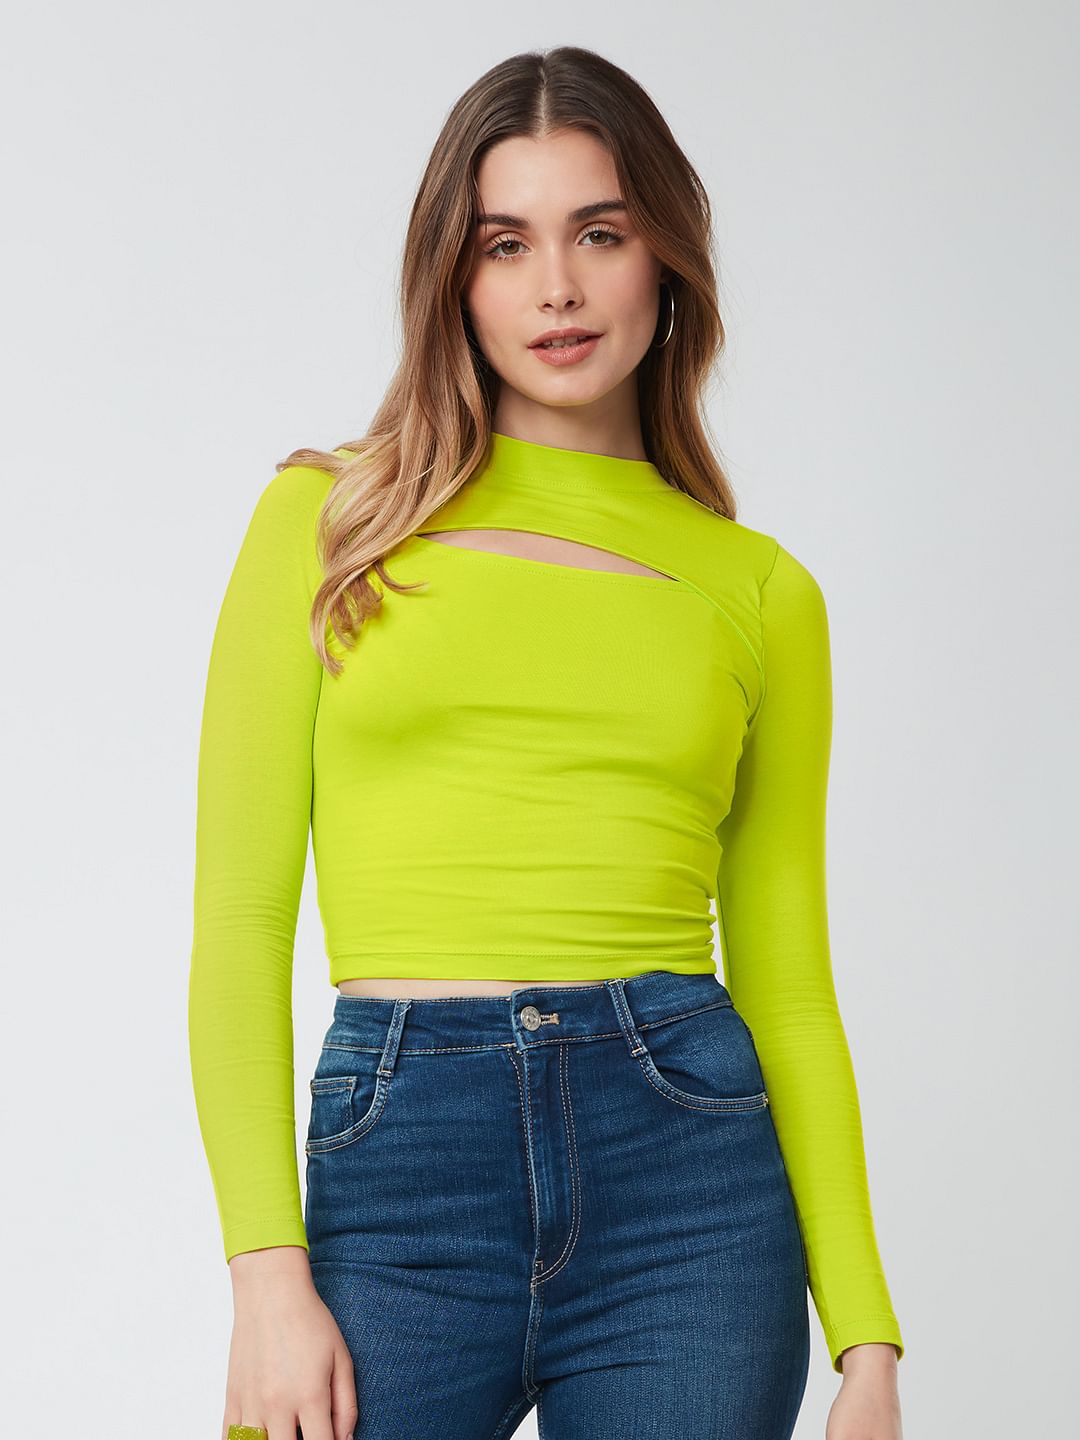 Solids: Lime Green (Cut Out)